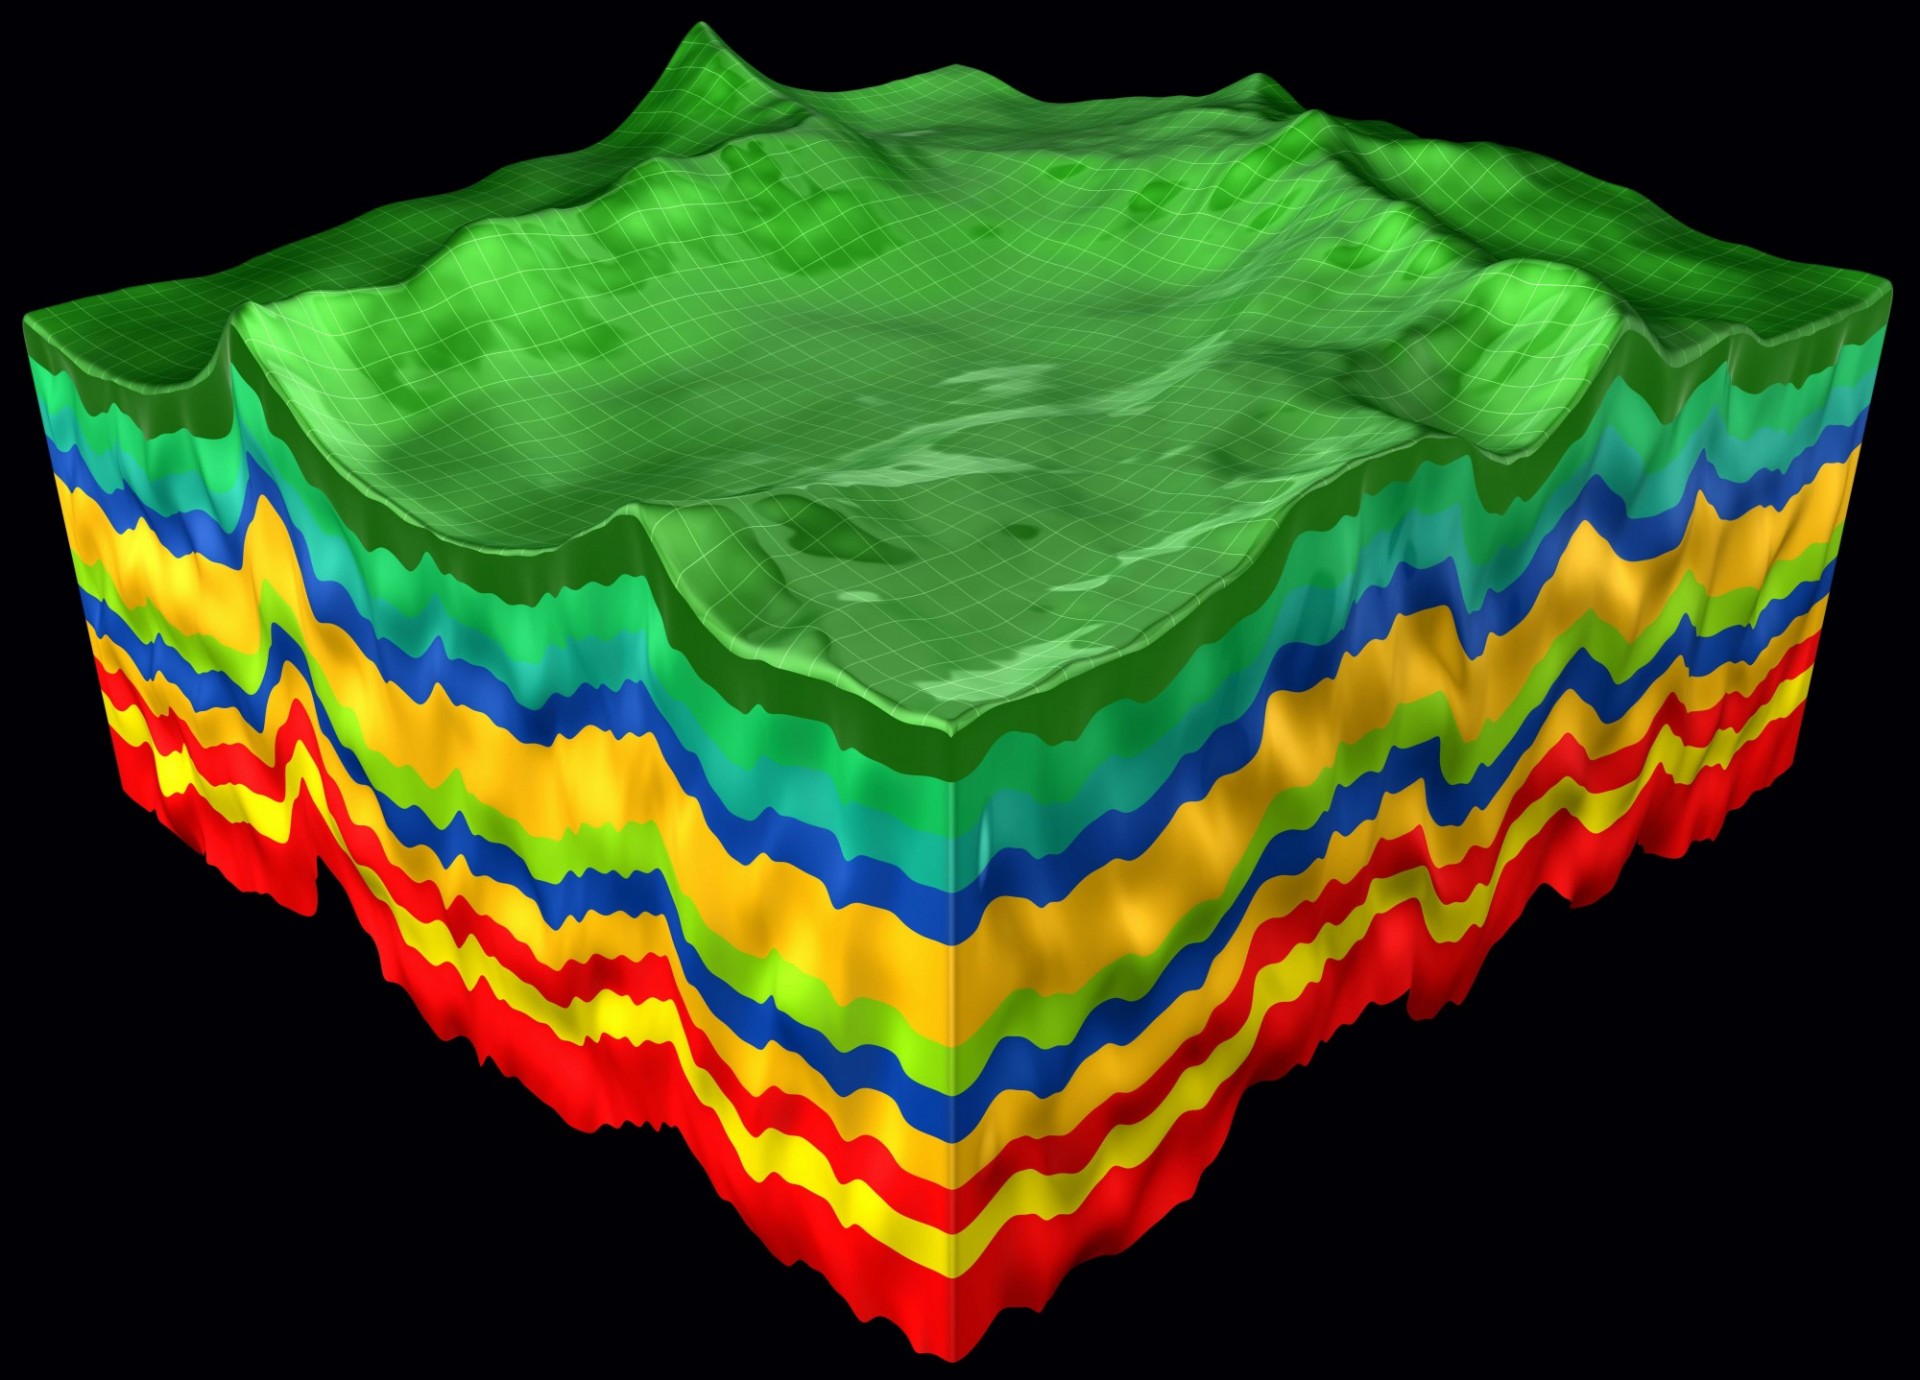 Subsurface geologic layers (for visualization and simulation)